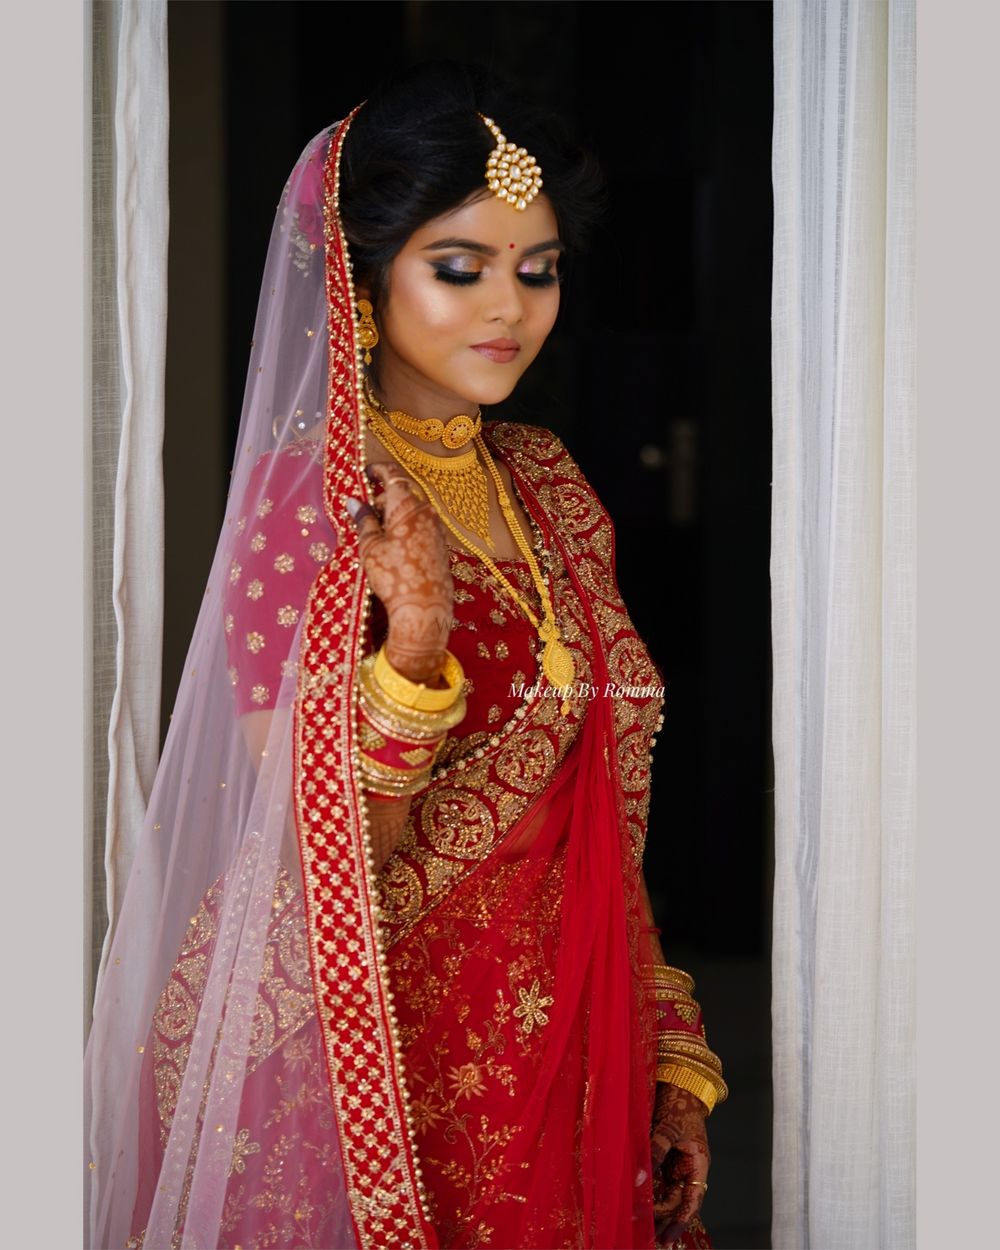 Photo From Bridal work 2020-21 - By Makeup by Romma